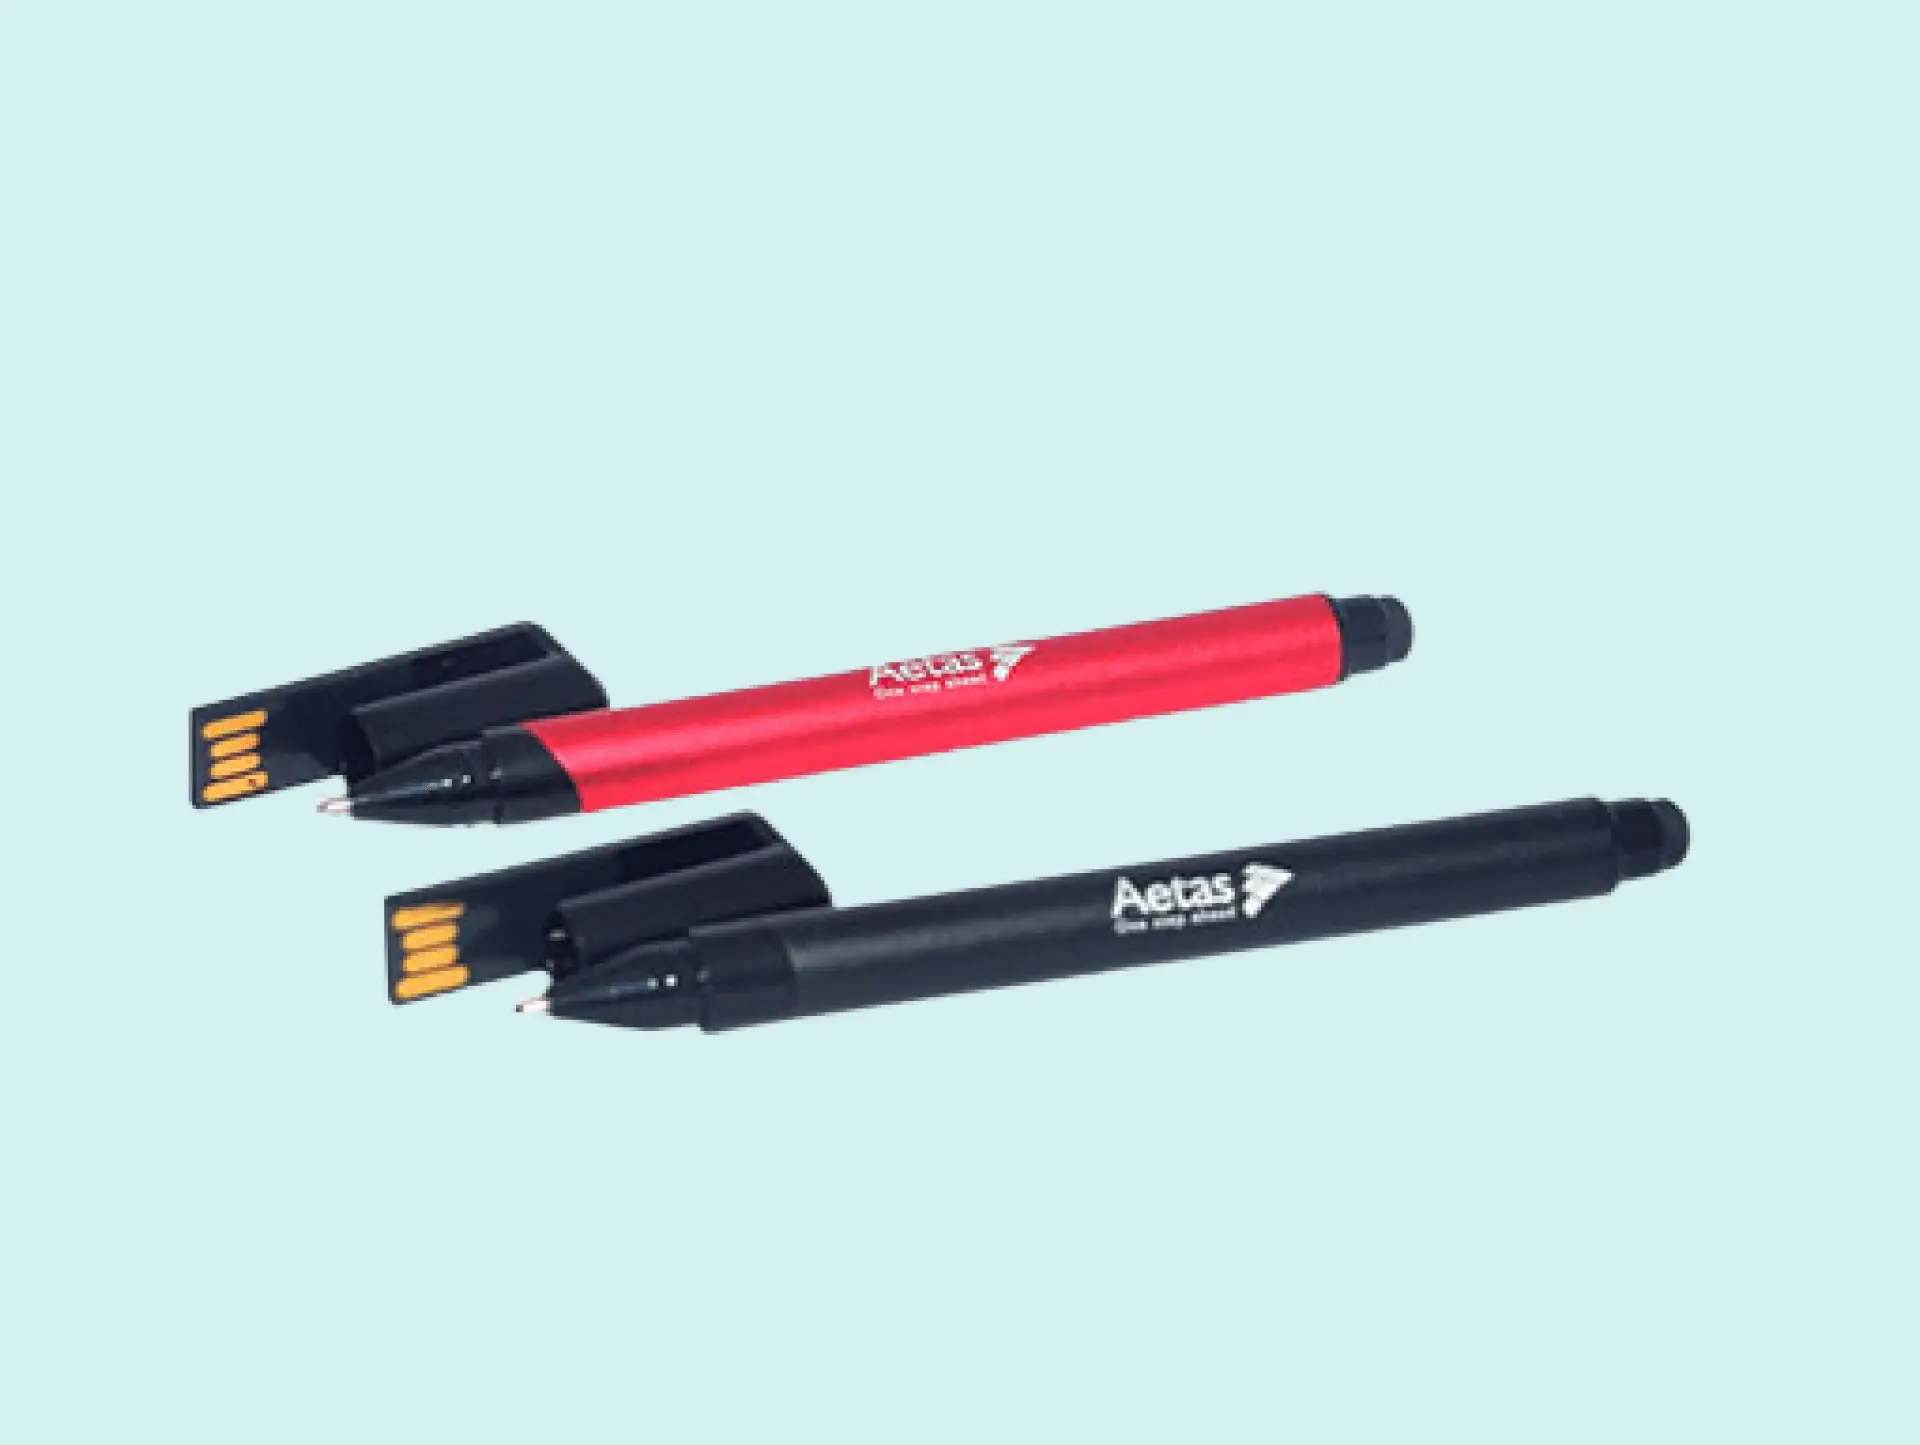 Customized Pen with USB Drive 